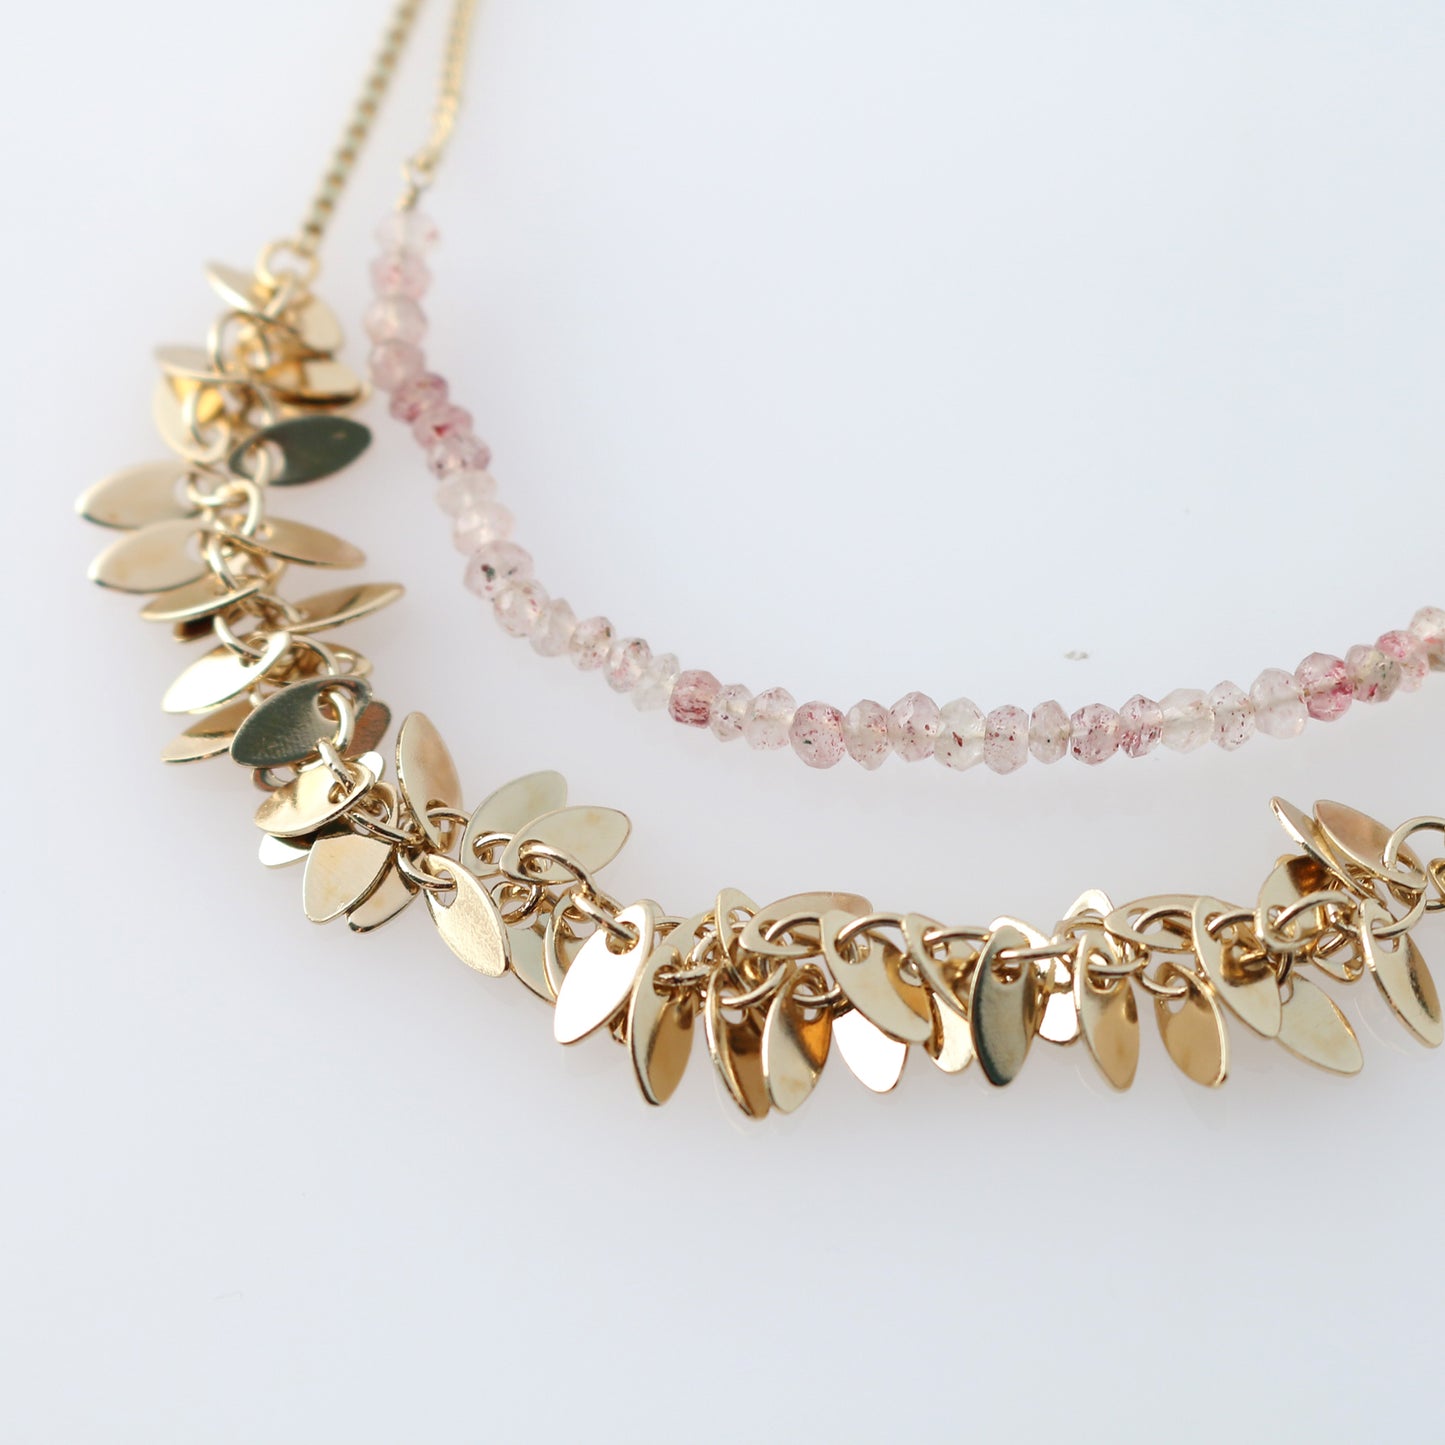 Two 3WAY necklaces with strawberry quartz and metal motifs